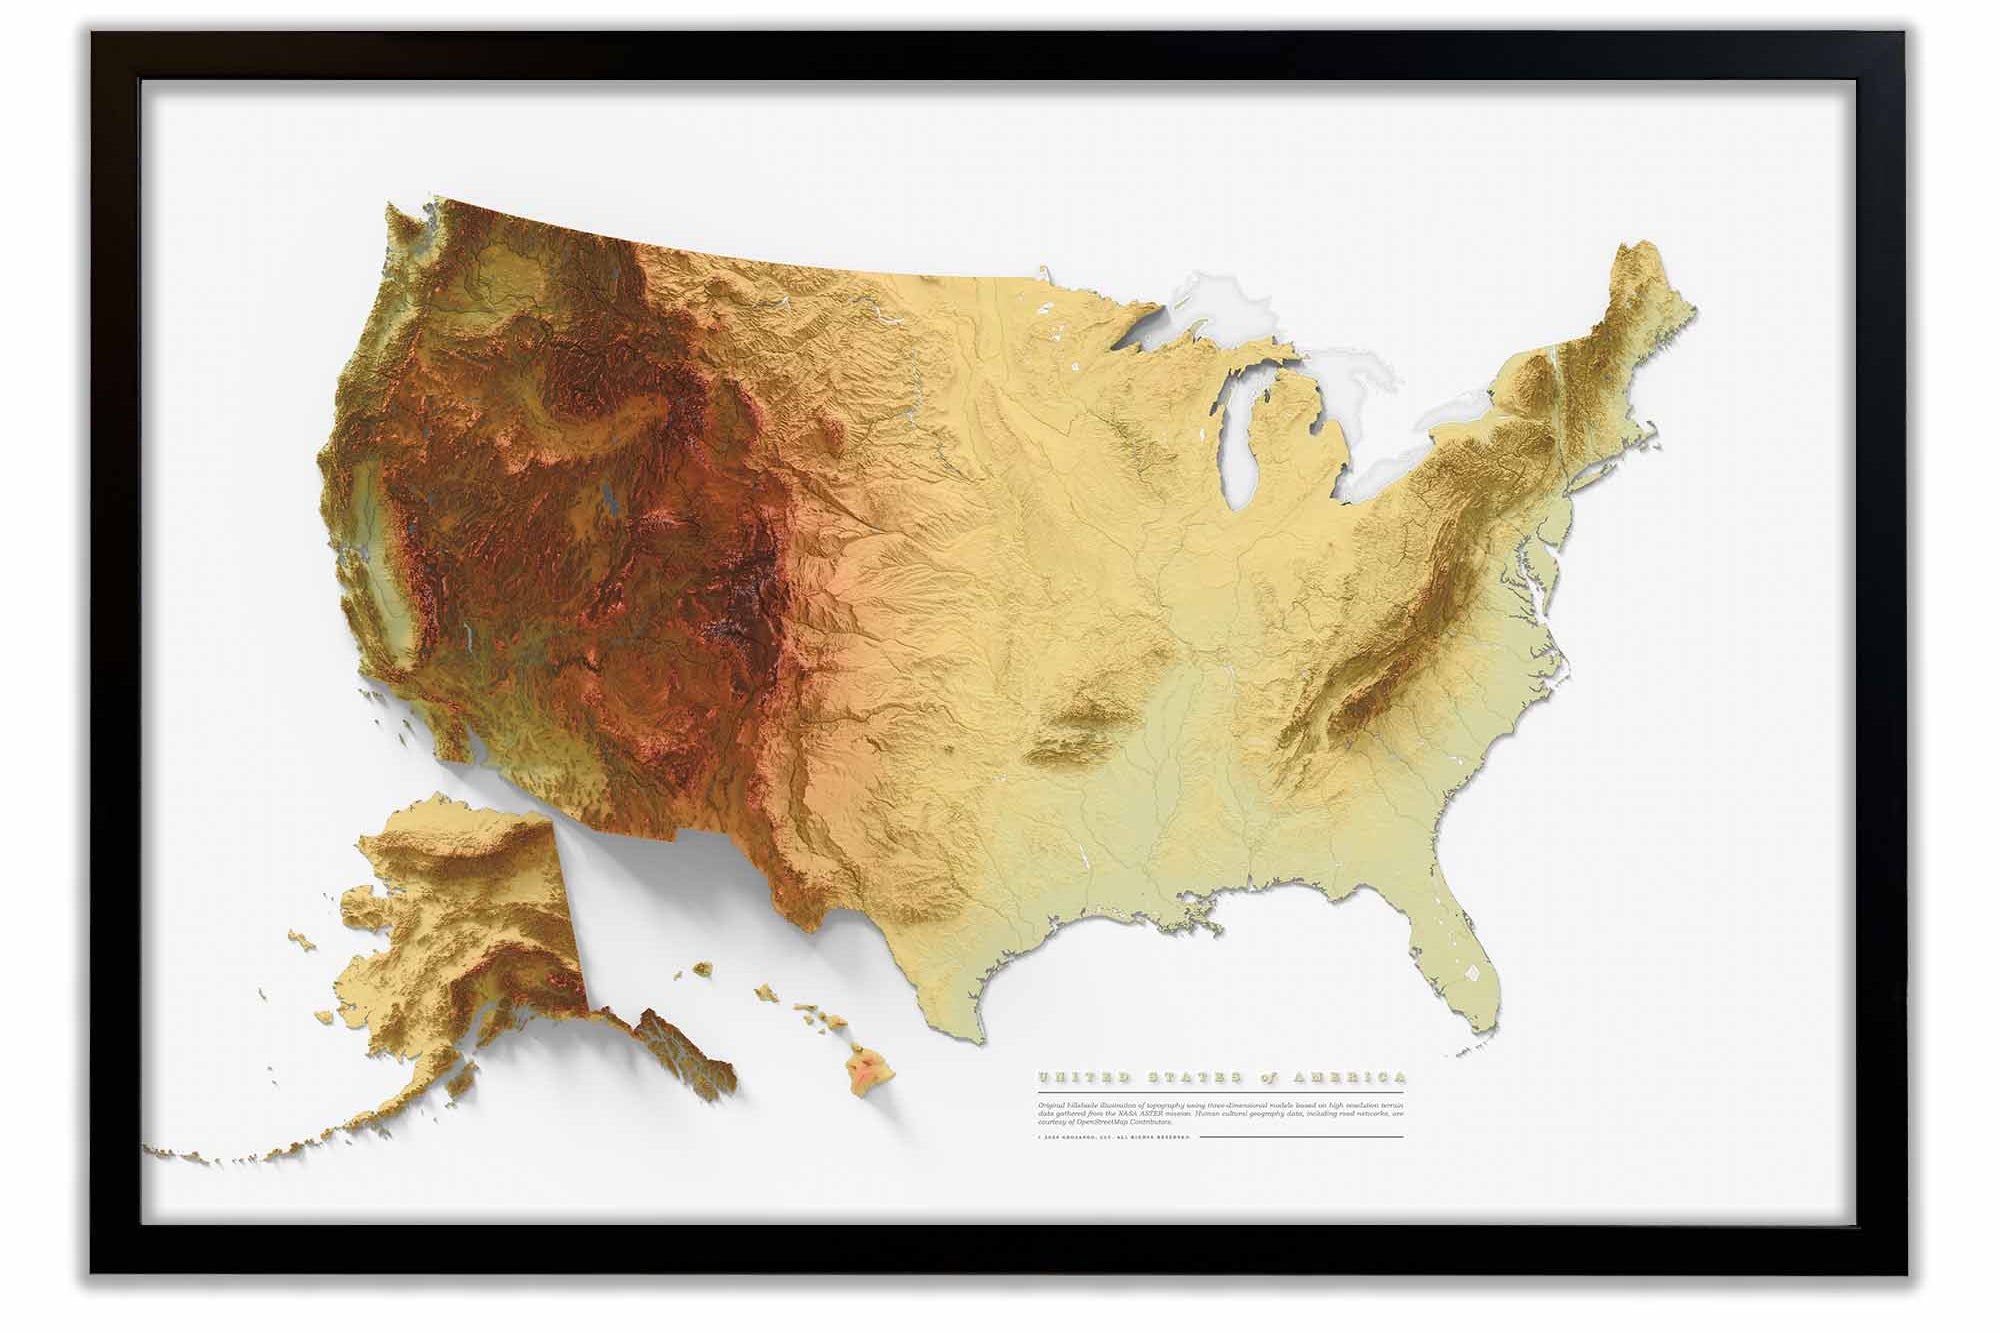 U.S. Elevation Map, featuring color hypsometric tints and deep shaded relief shadows for a 3d effect of America's topography